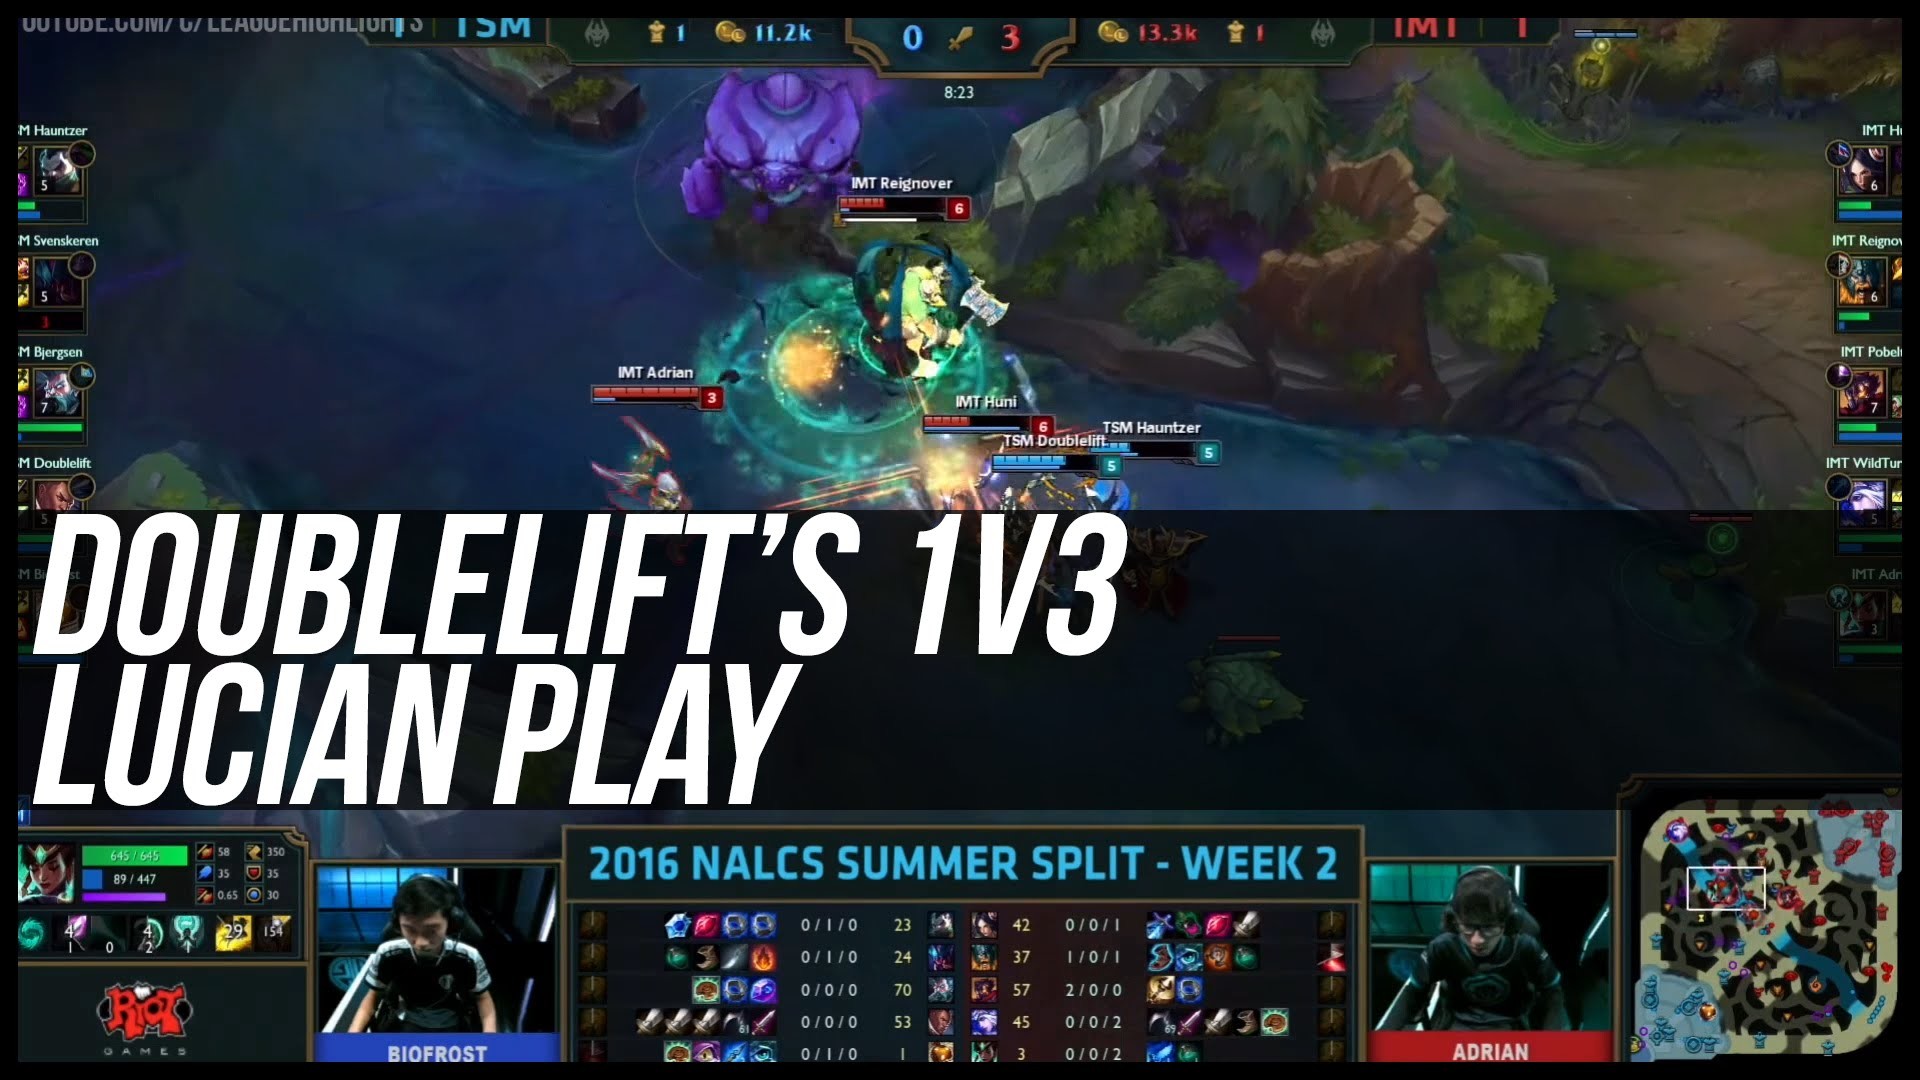 NA LCS Doublelift goes nuts in 1v3 vs Immortals